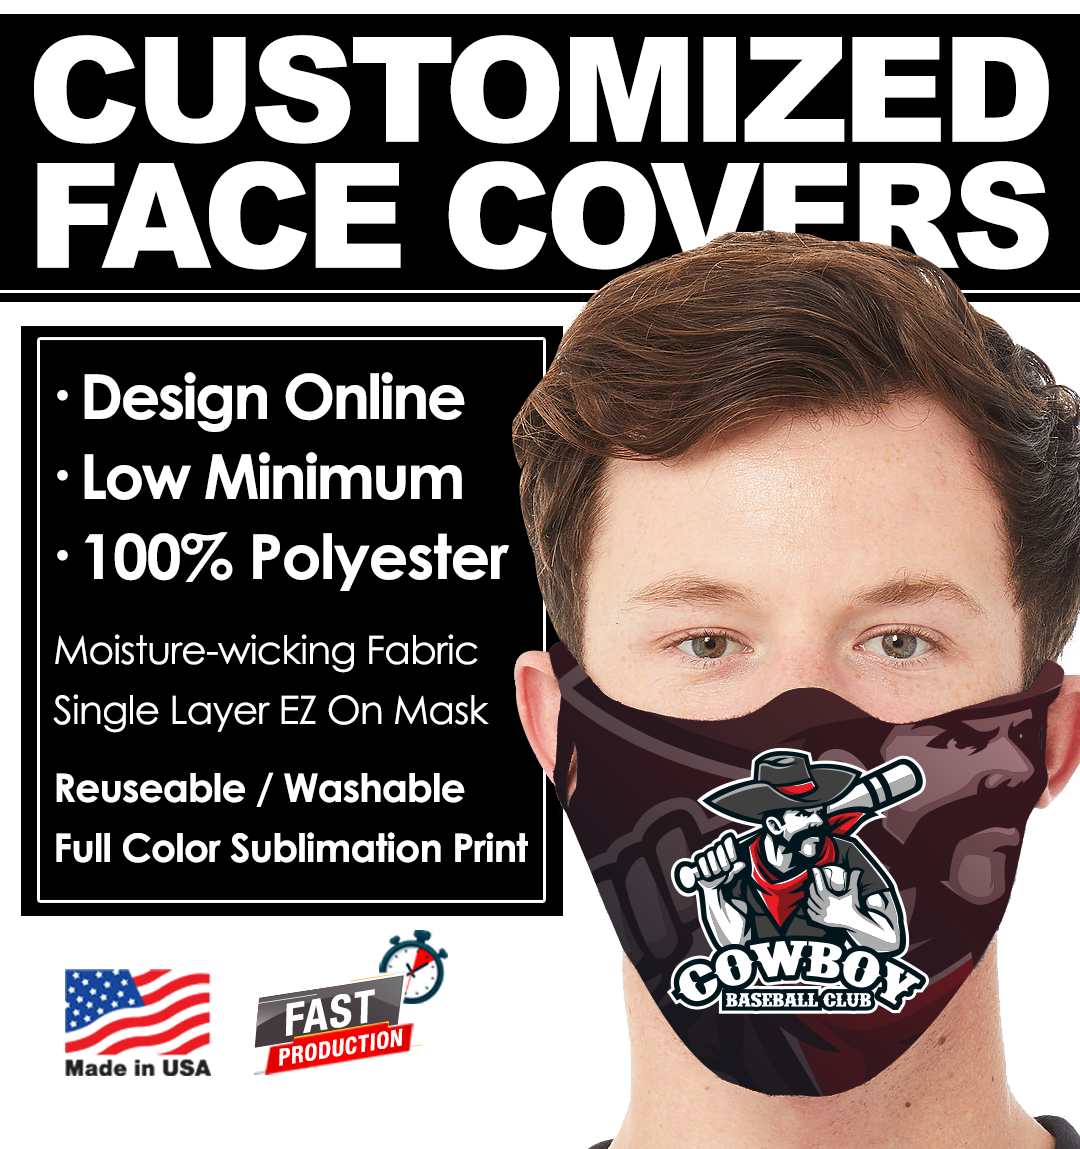 Face Covers customized with your companies logos or colors. Dye-sublimation printed over the entire face of the mask.